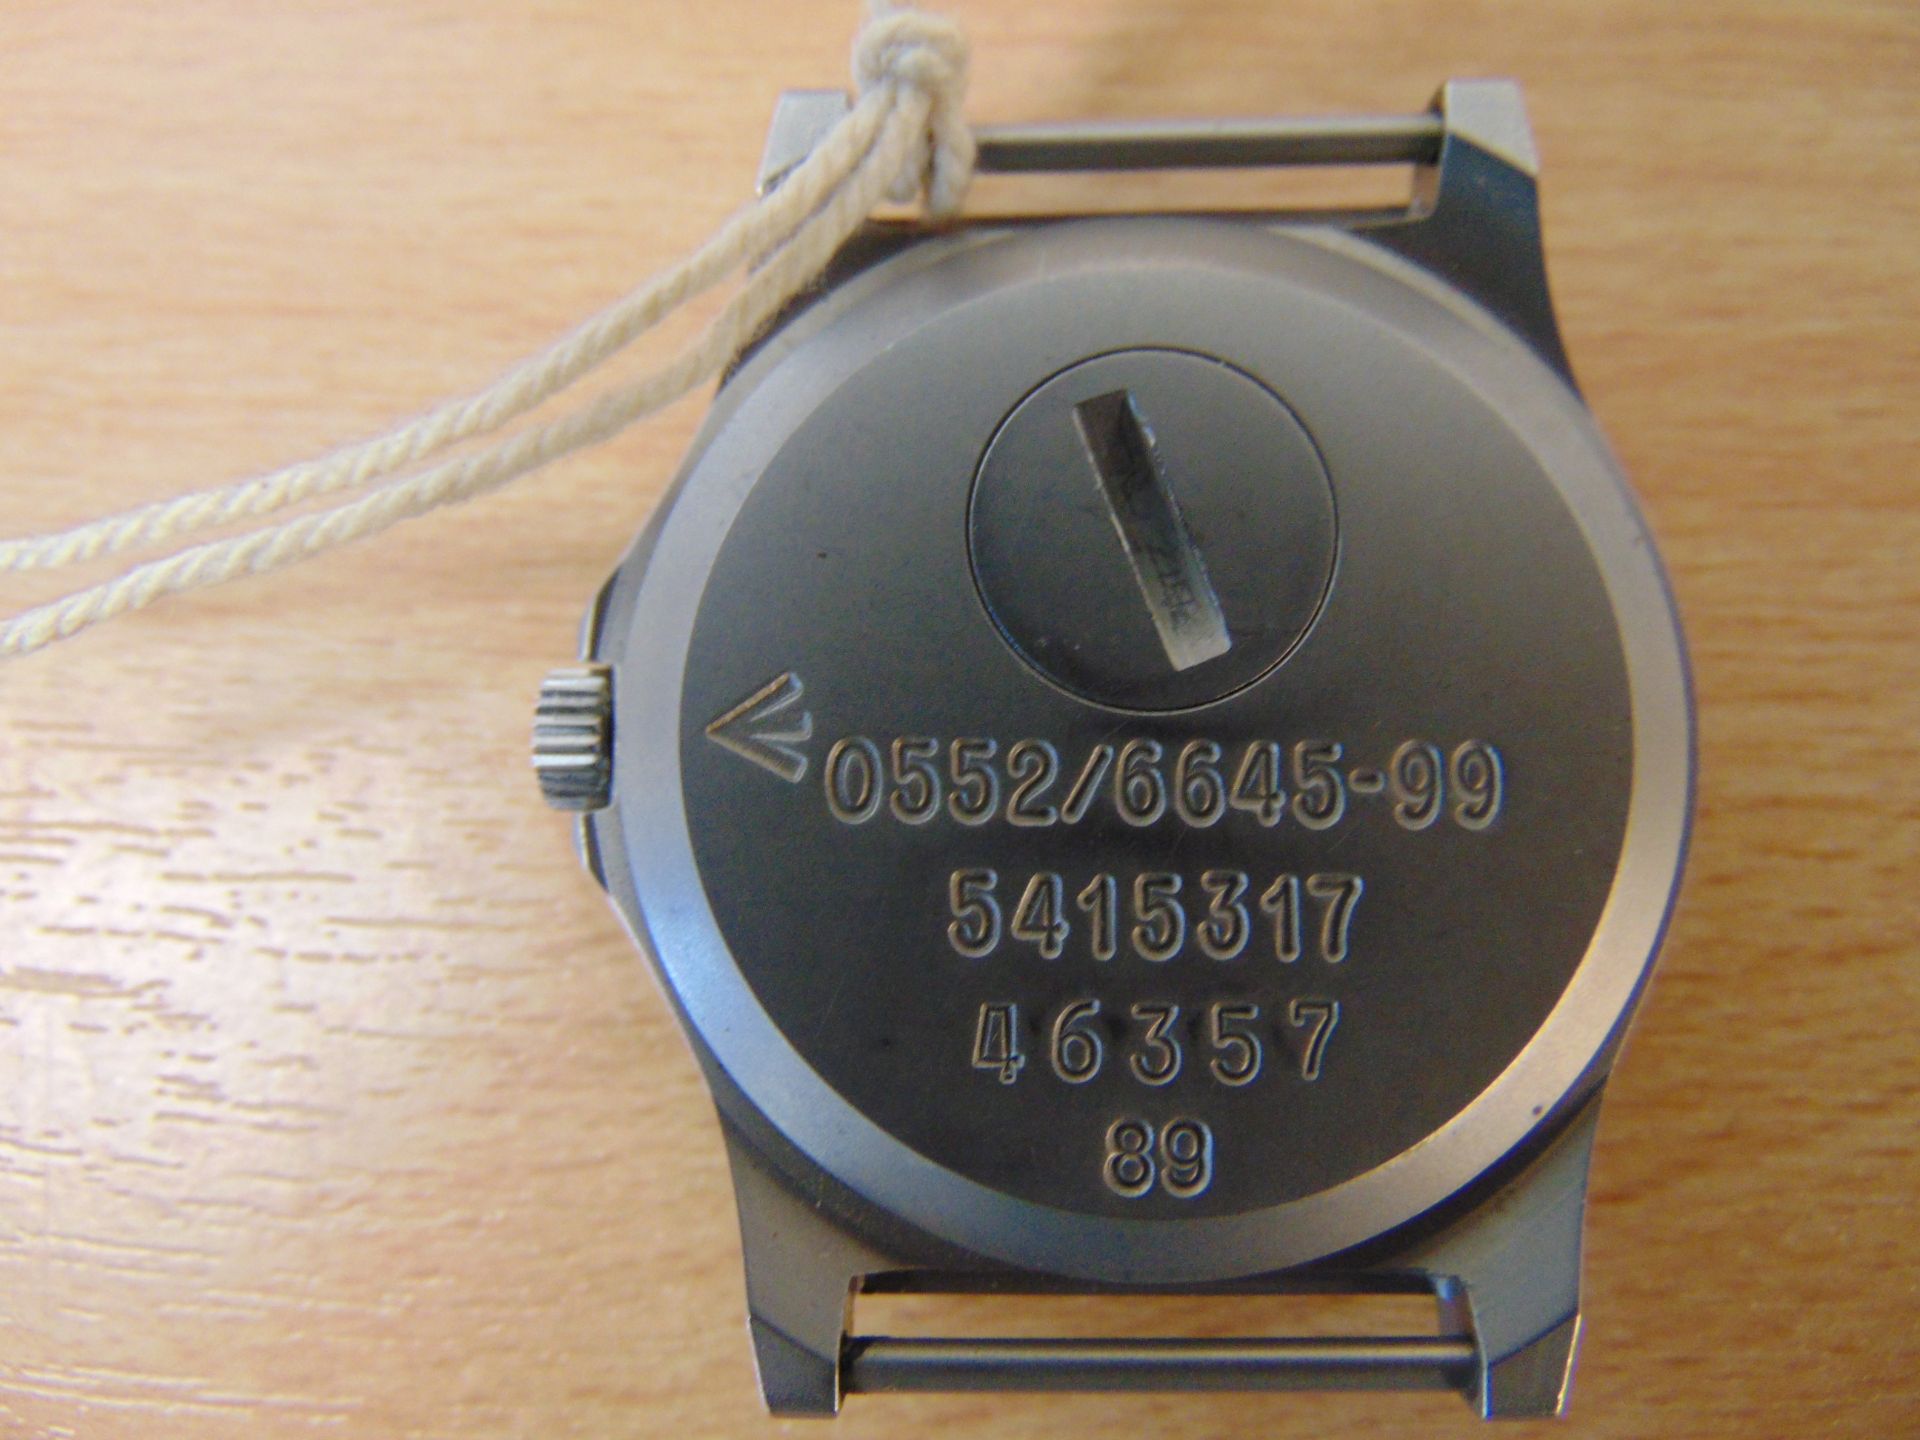 CWC 0552 Royal Navy Marines Service Watch, Nato Marks, Date 1989, * Pre Gulf War 1 * - Image 3 of 4